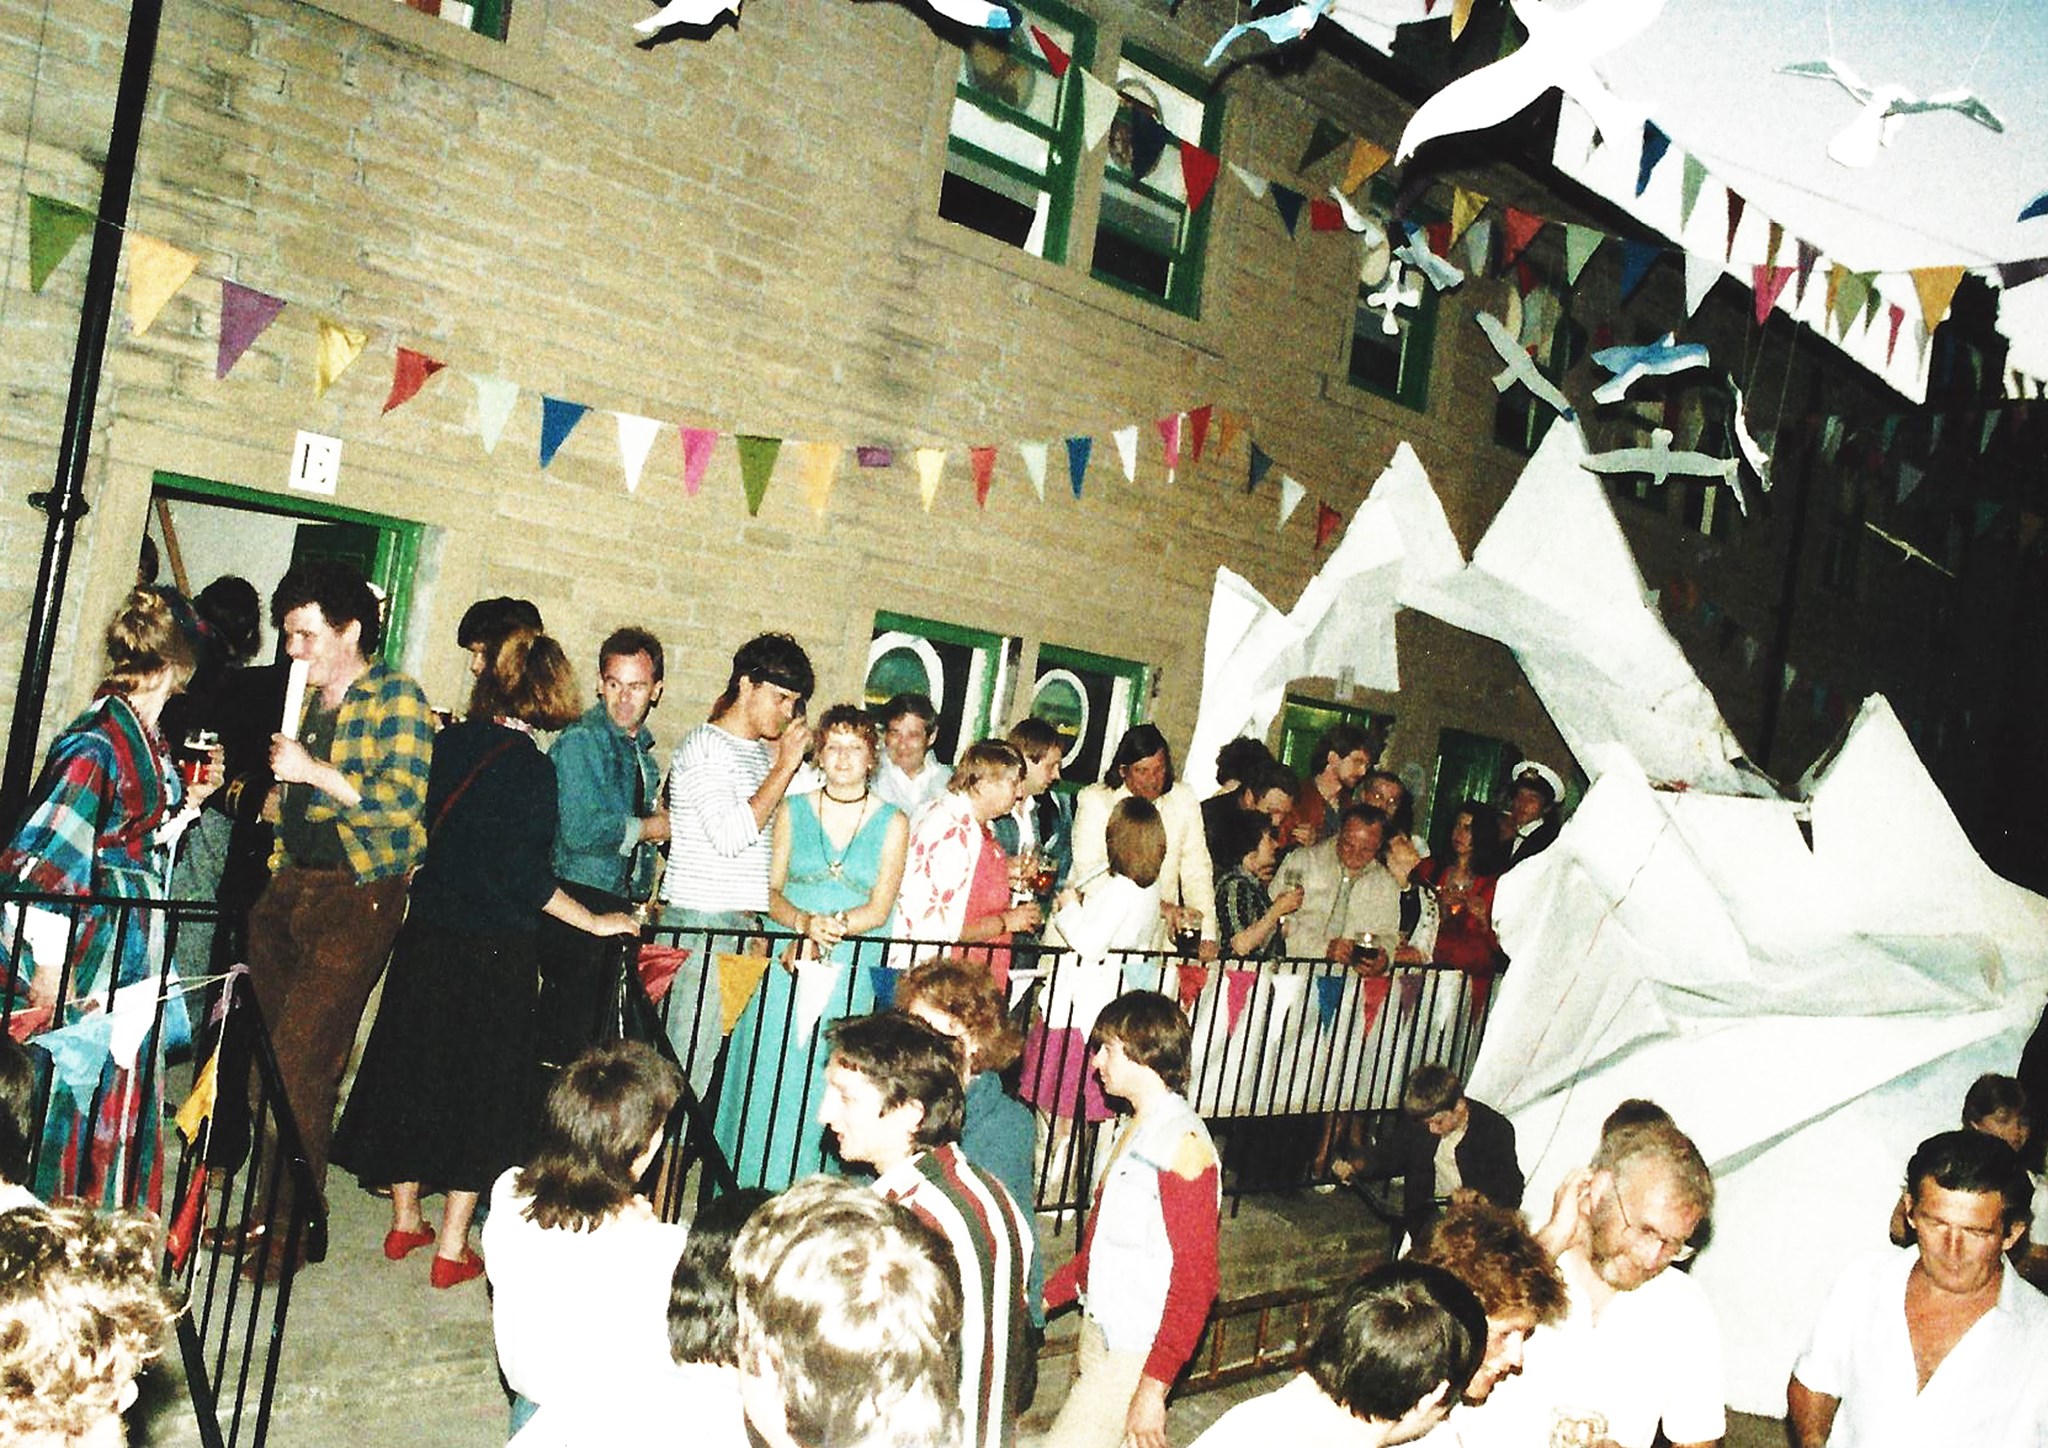 Archive image of arts activity at South Square, Bradford